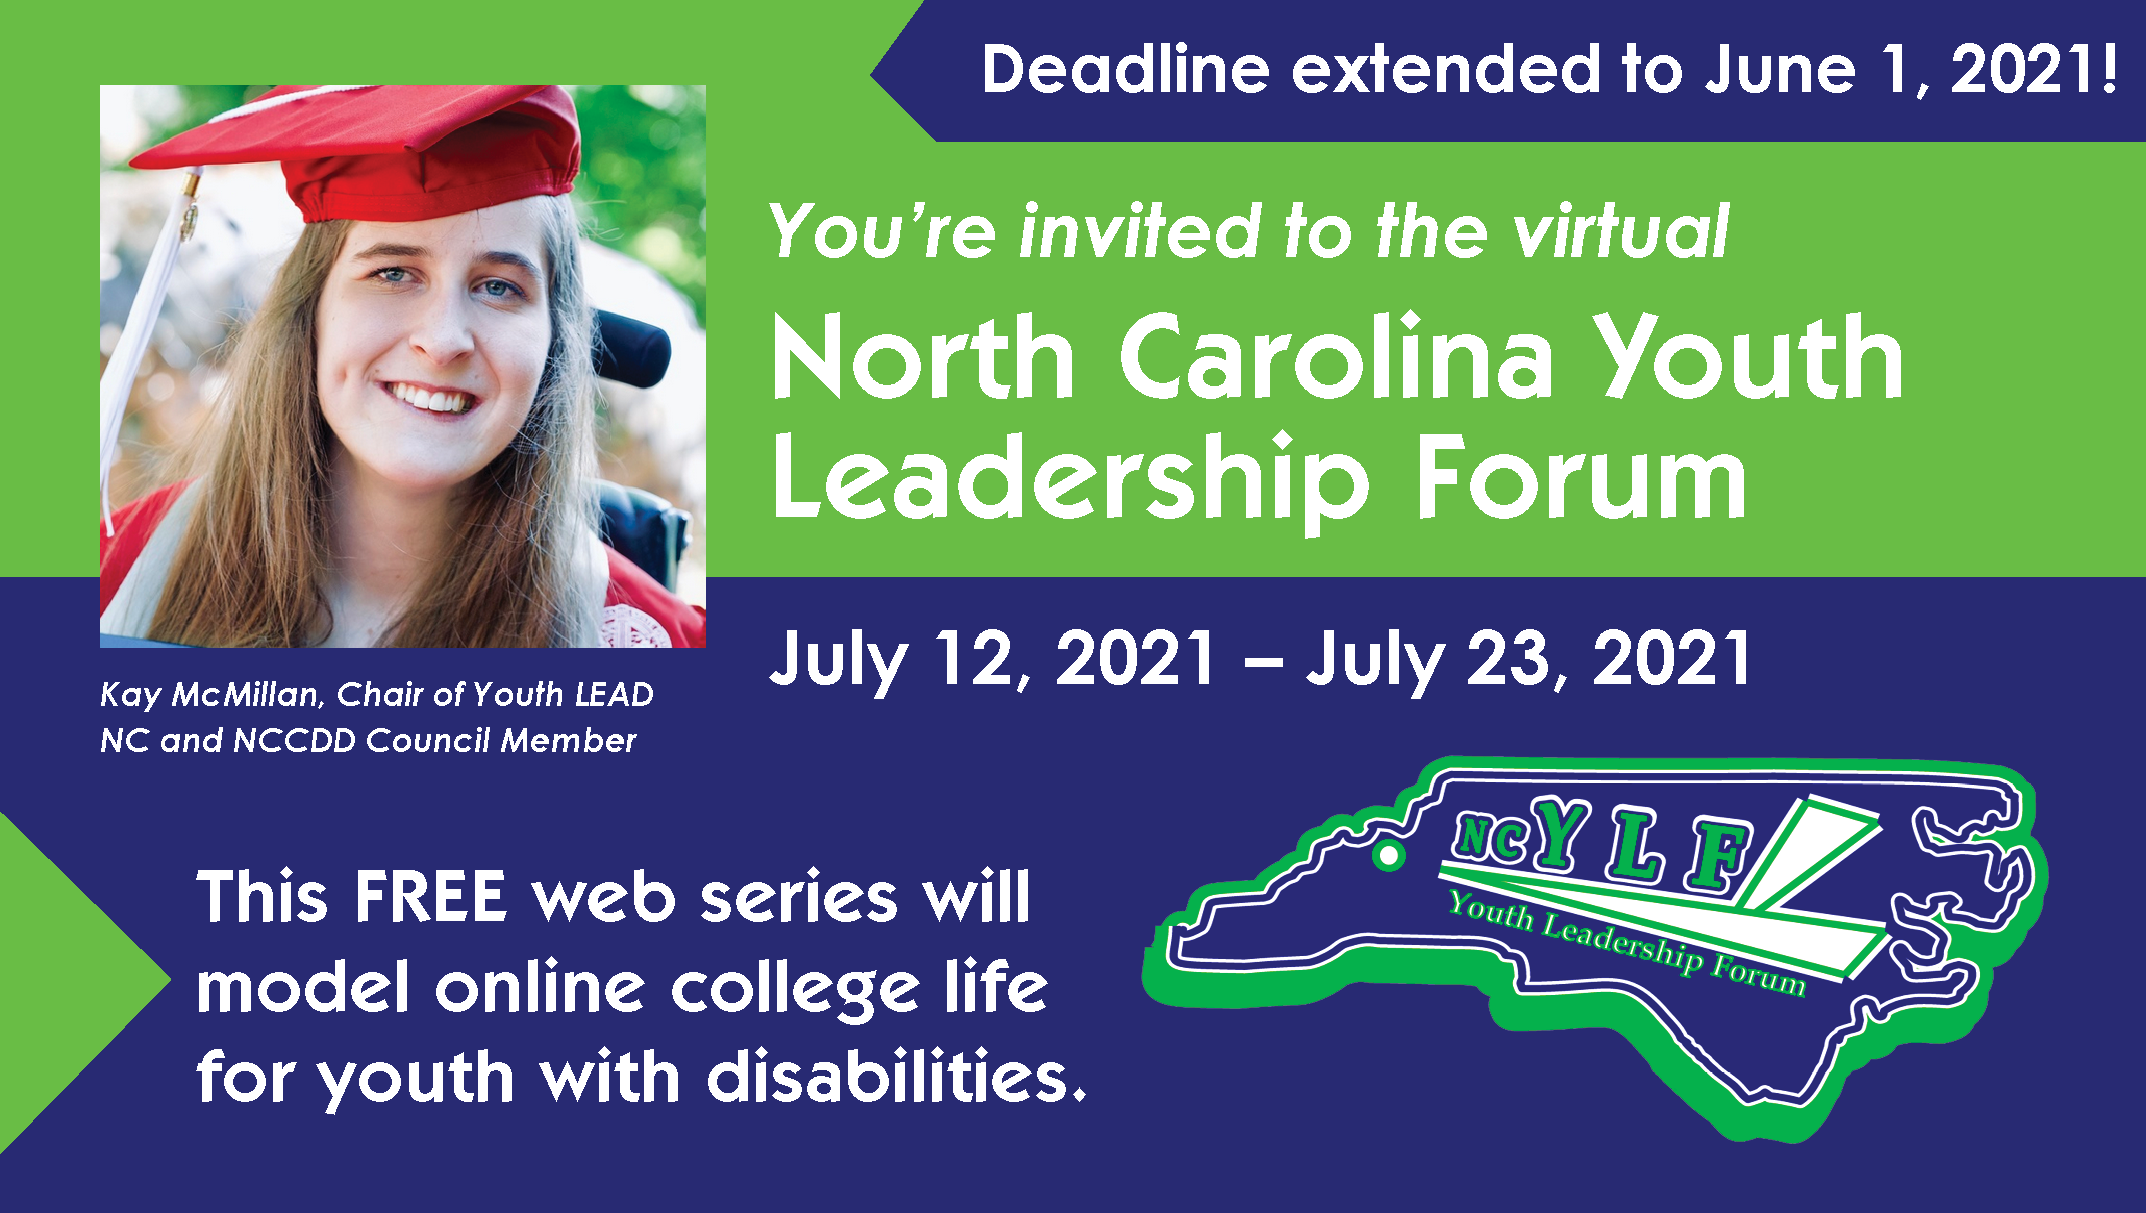 NC Youth Leadership Forum (NCYLF) Deadline extended to June 1